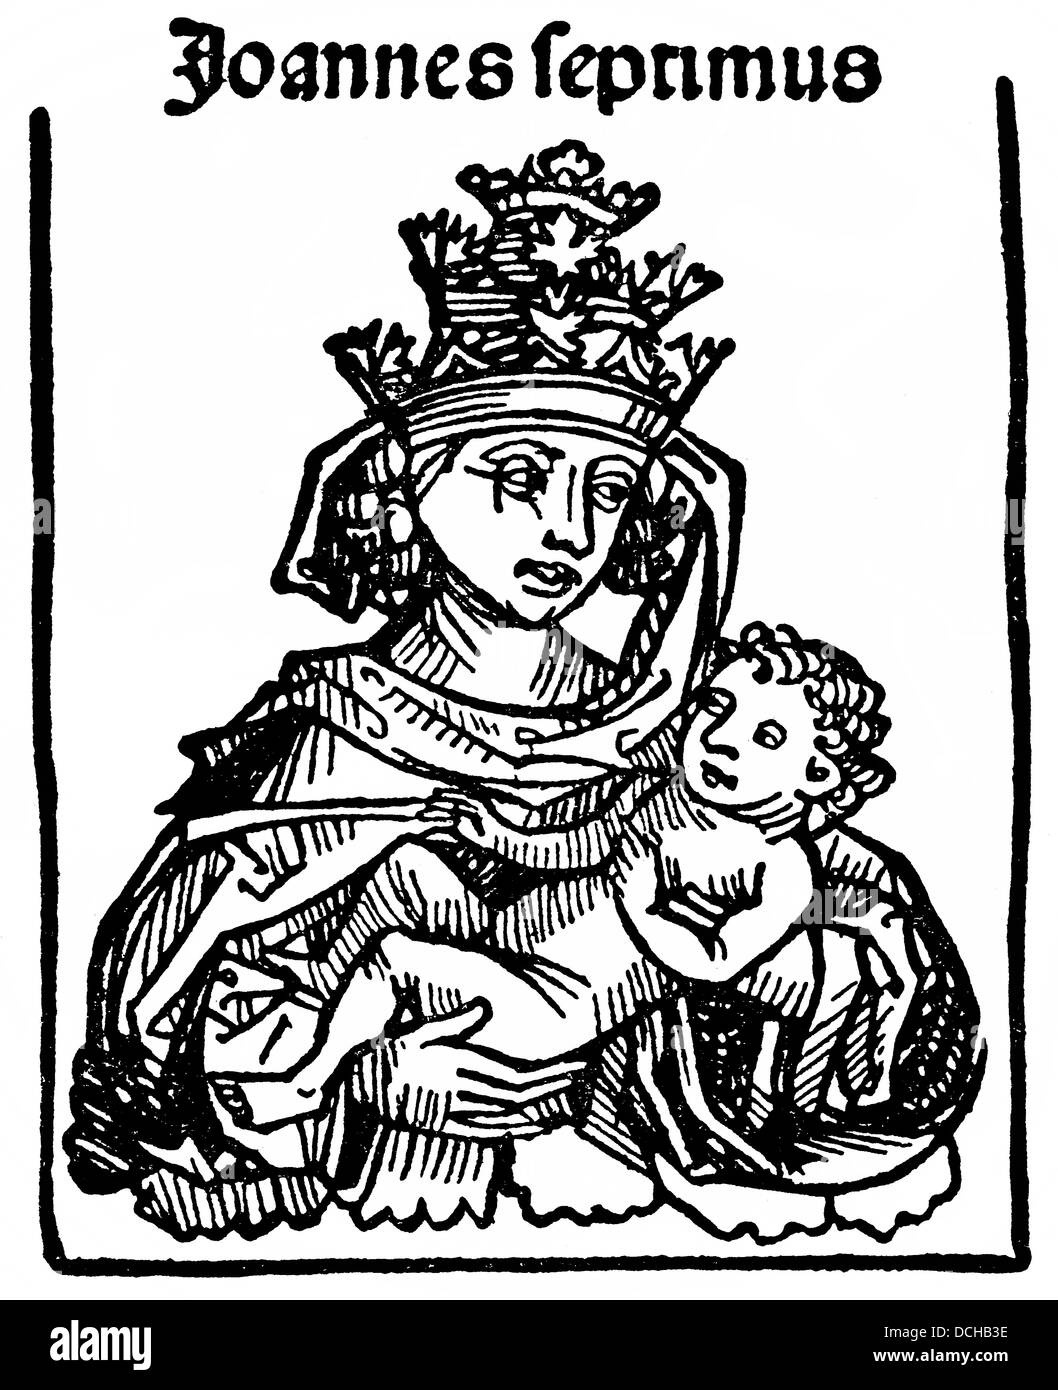 representation of Pope Joan in the Schedelschen Weltchronik, Nuremberg Chronicle, 1493 Stock Photo